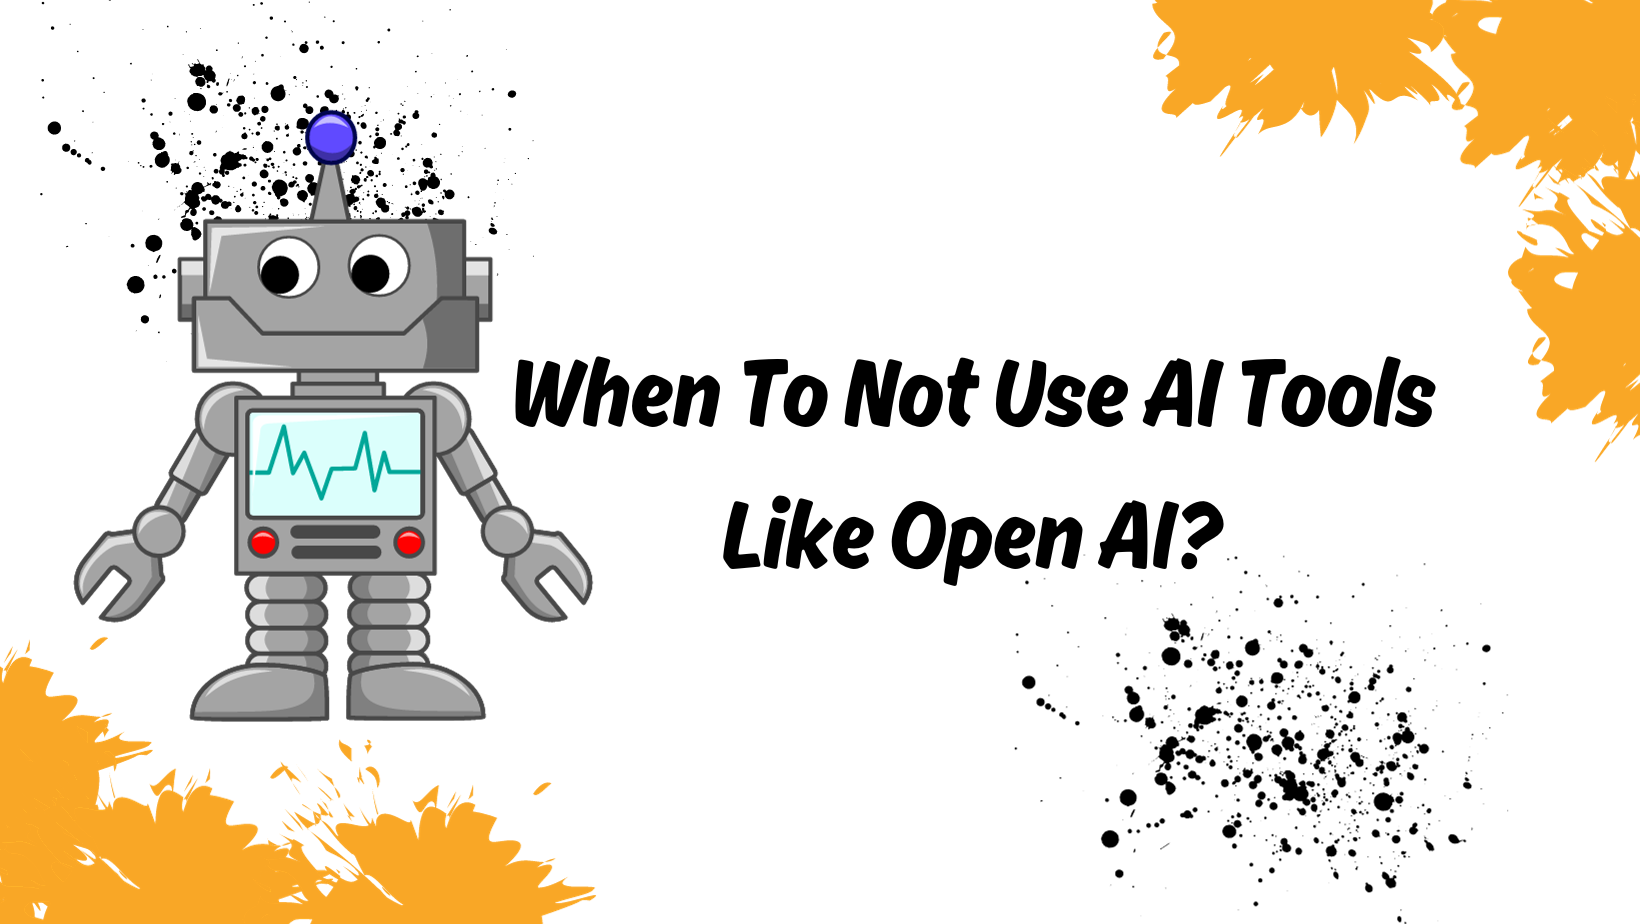 When To Not Use AI Tools Like Open AI